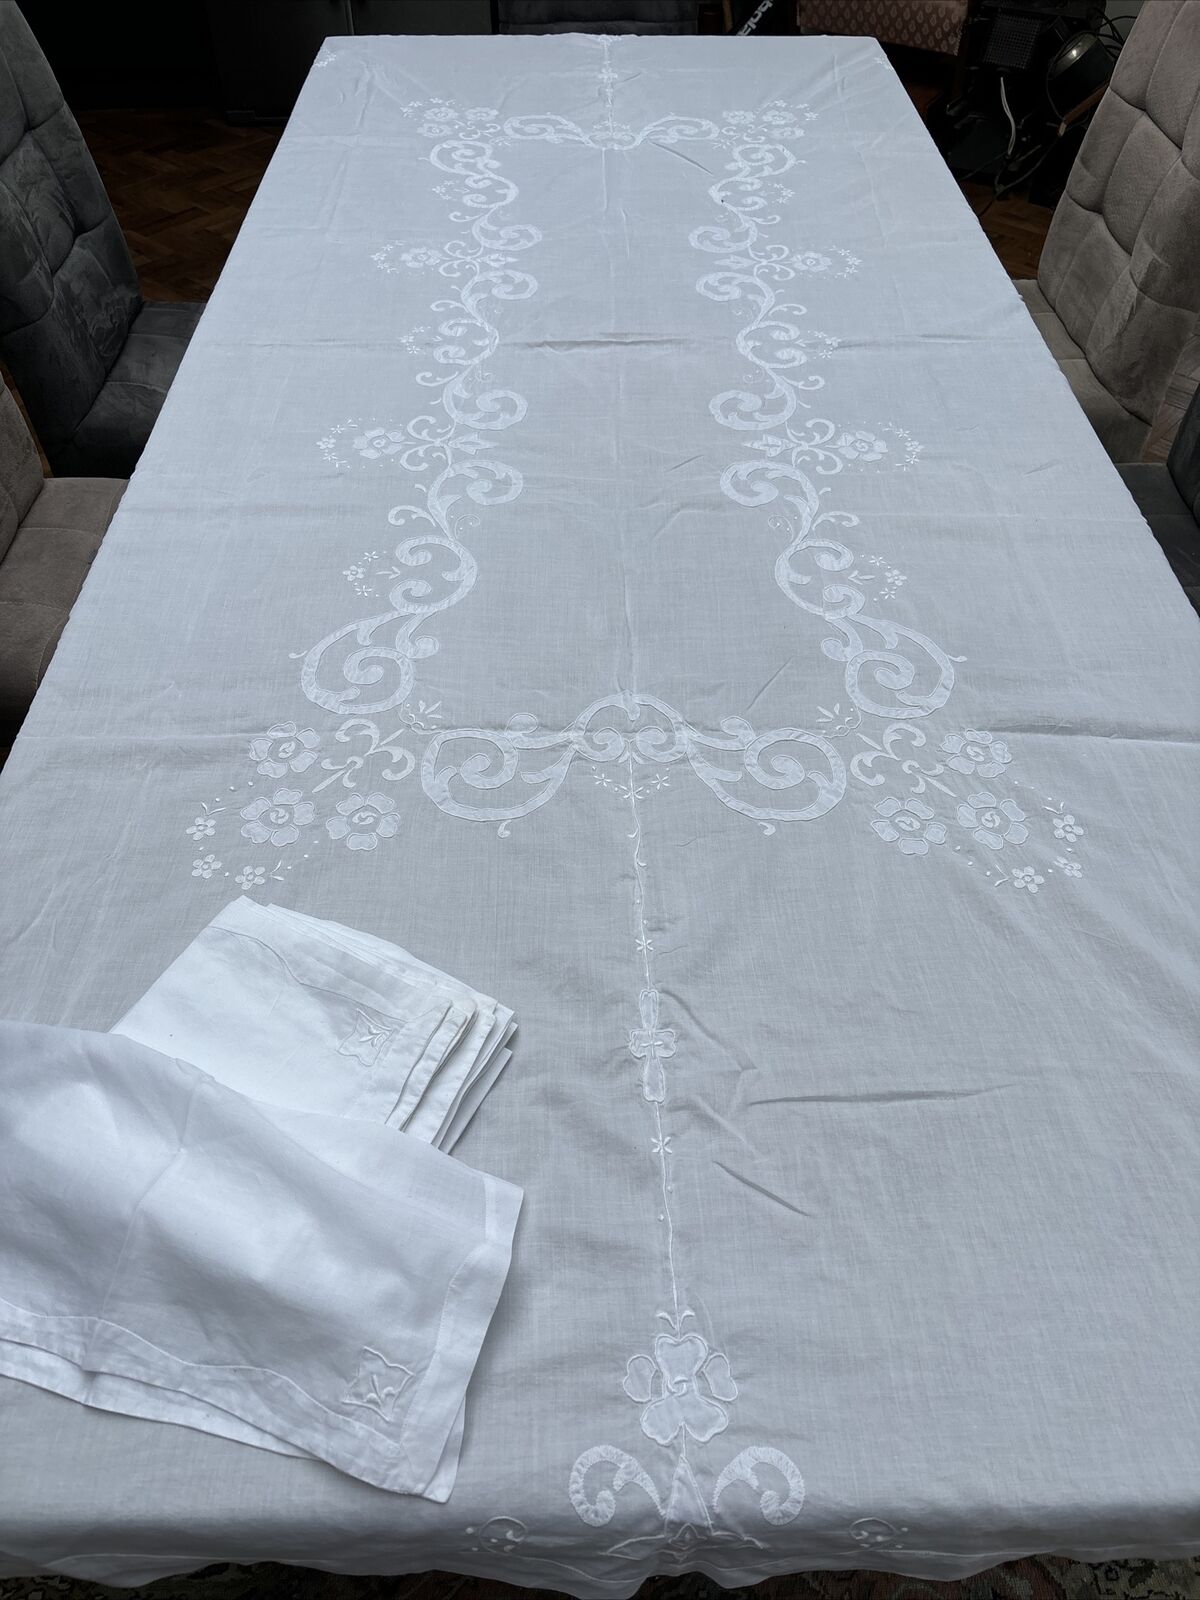 Large Vintage Embroidered Tablecloth And 12 Napkins Approx 5ft X 8ft6